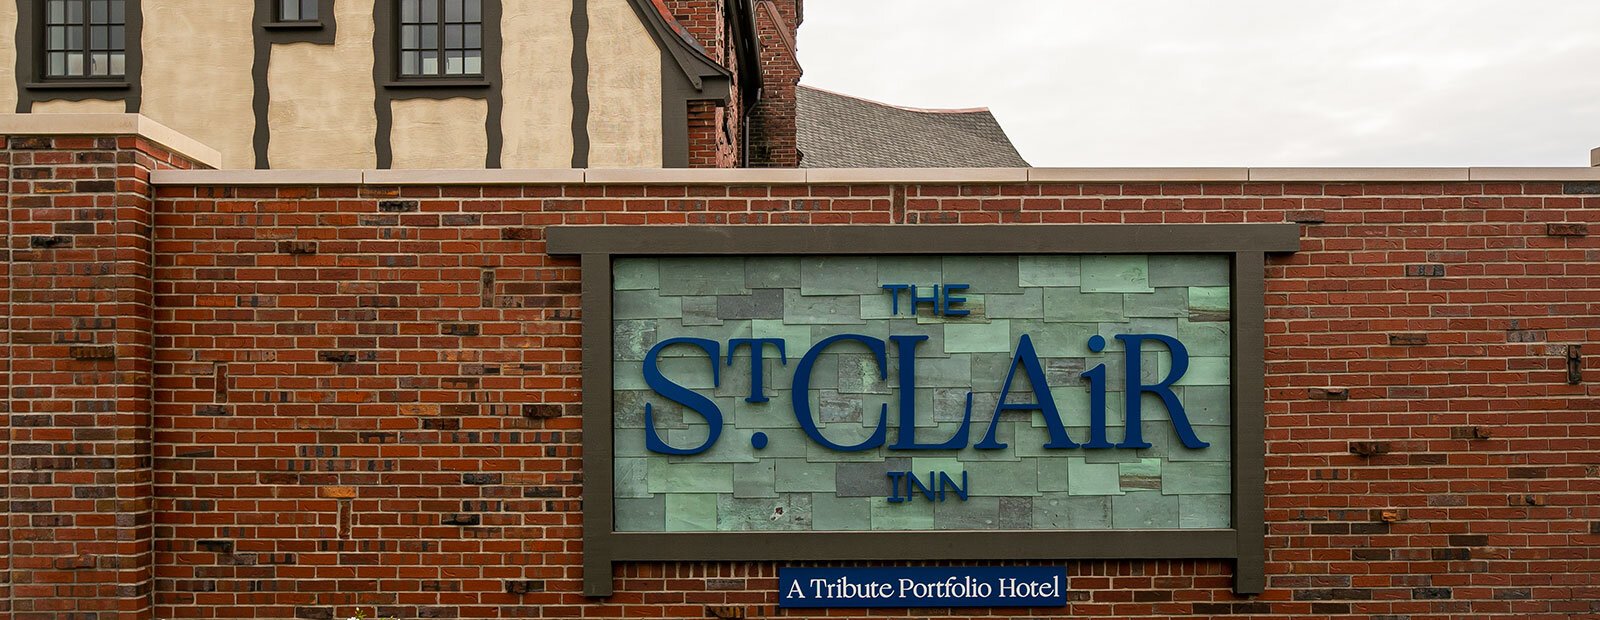 The city of St. Clair is changing as historic inn readies for opening